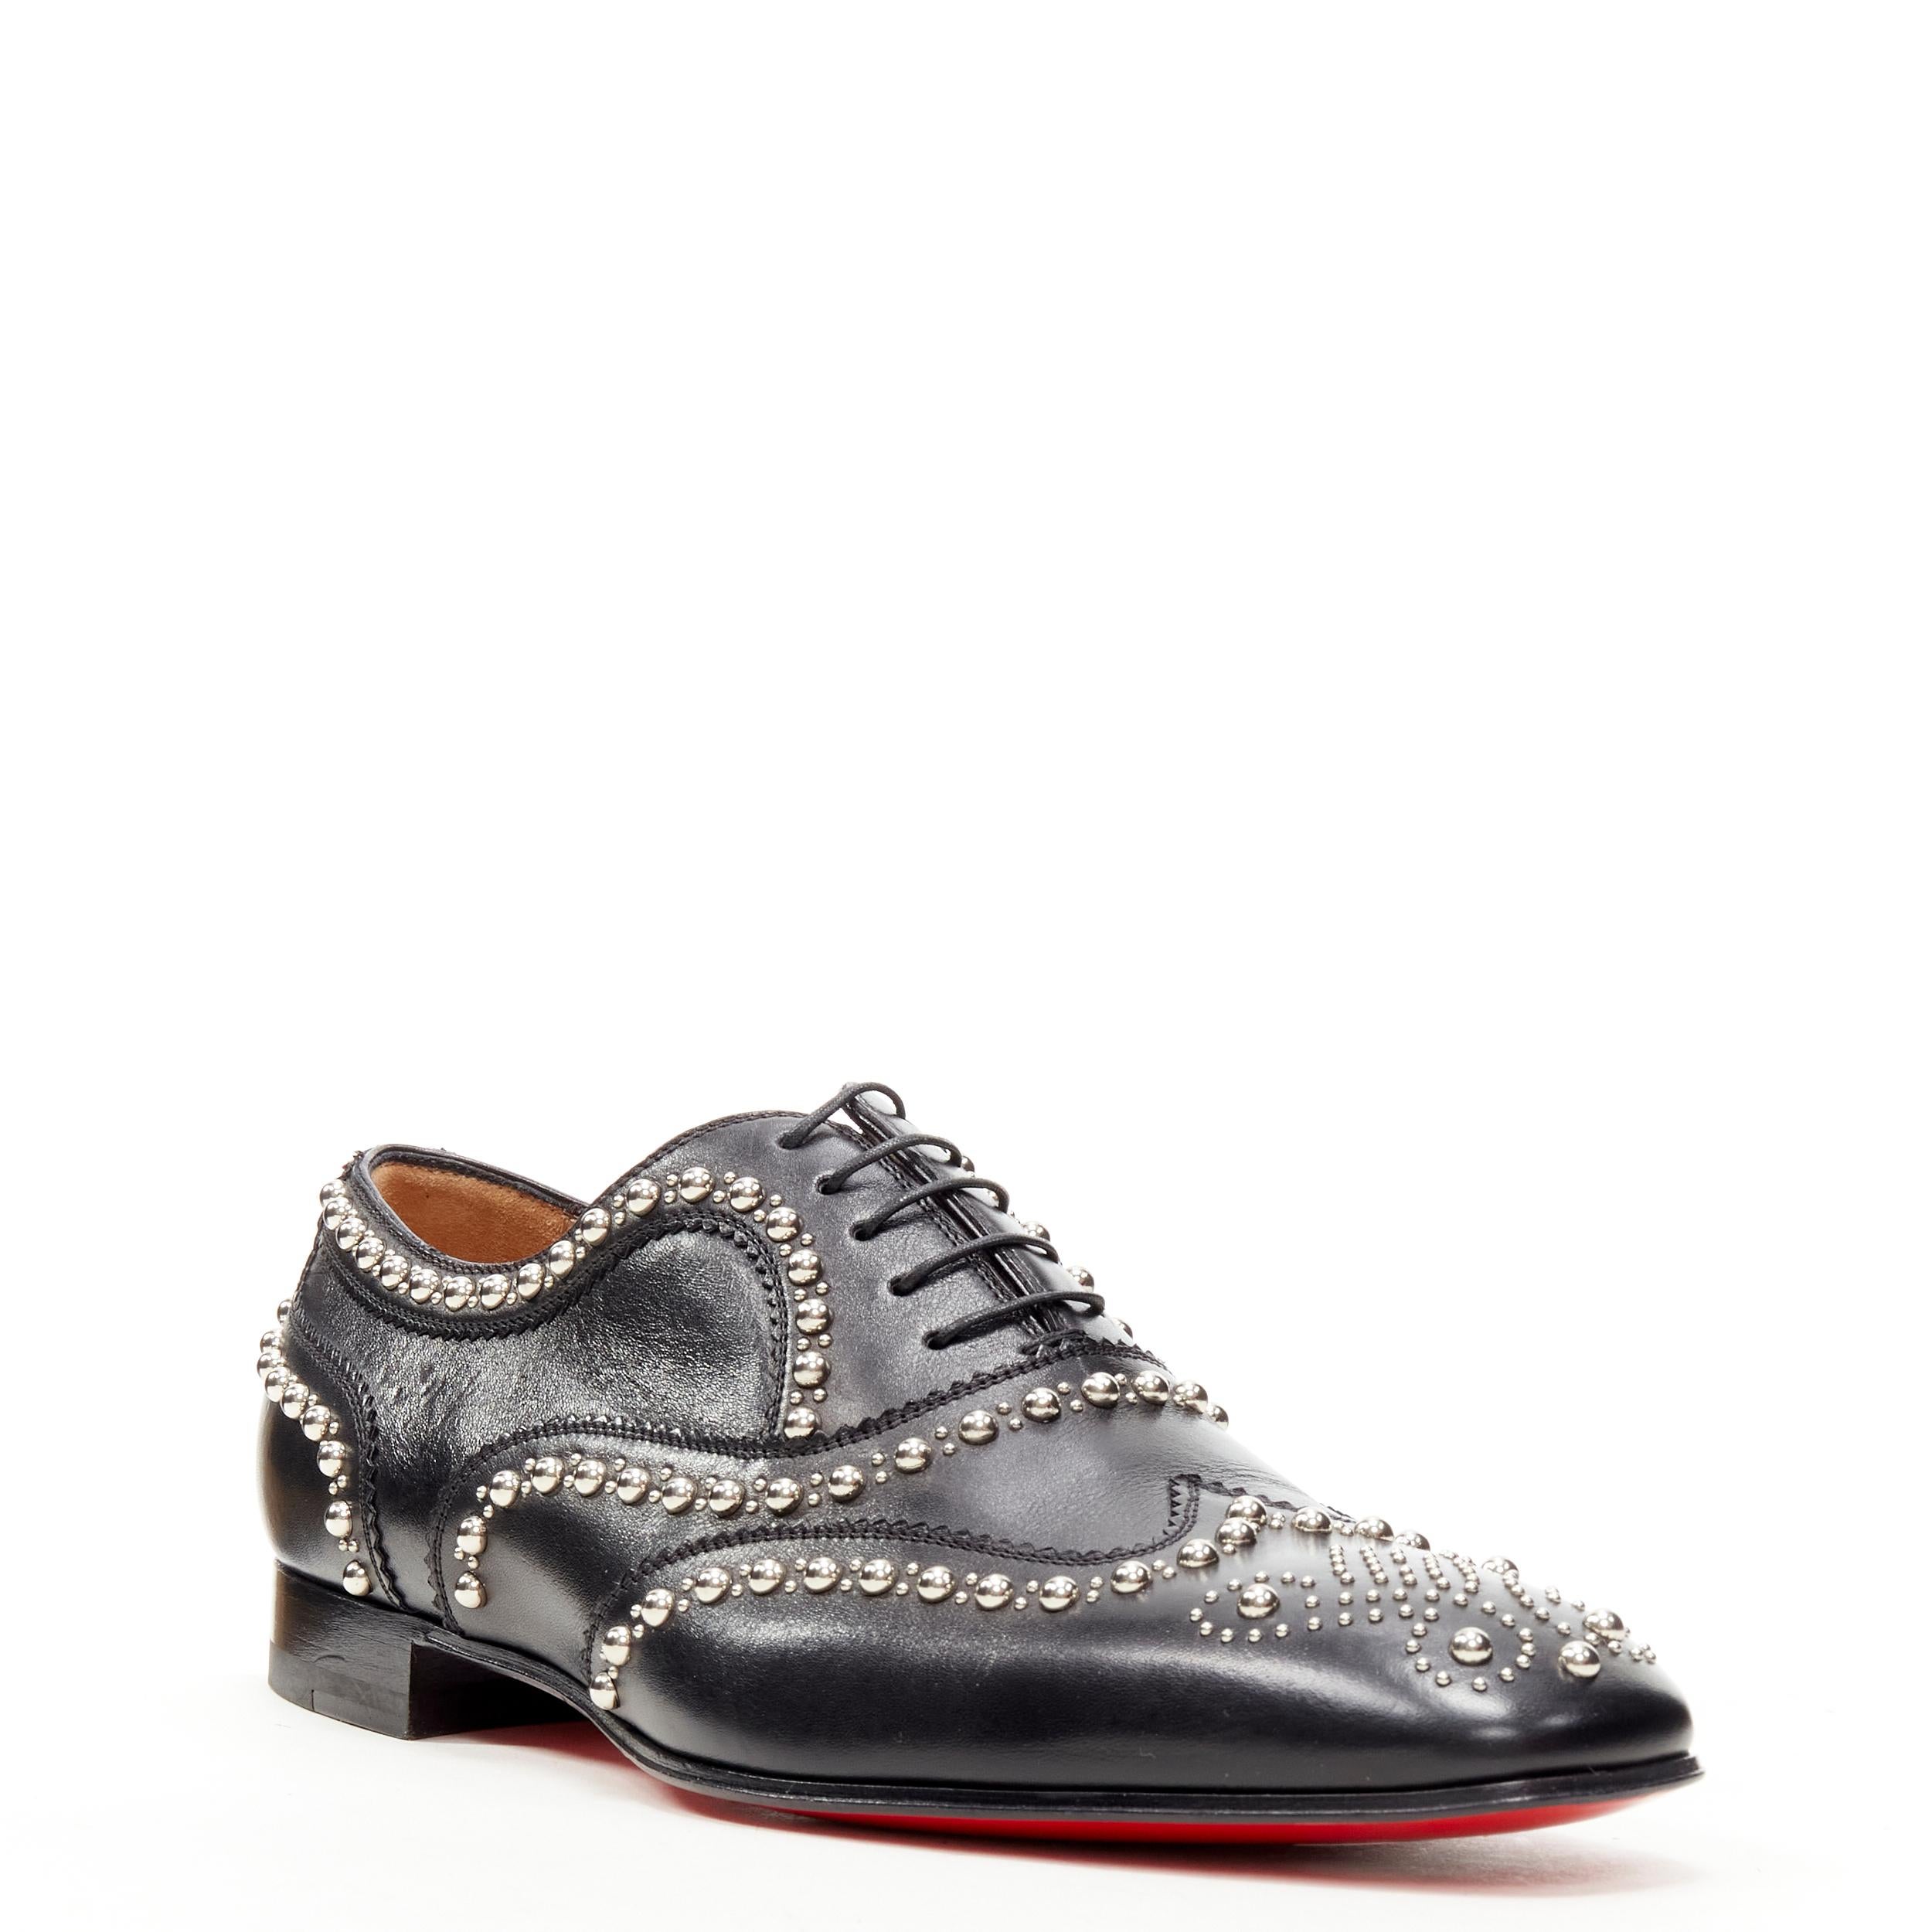 new CHRISTIAN LOUBOUTIN Charlie Clou black silver studded oxford brogue EU42.5 
Reference: TGAS/C01115 
Brand: Christian Louboutin 
Designer: Christian Louboutin 
Model: Charlie Clou 
Material: Leather 
Color: Black 
Pattern: Solid 
Closure: Lace Up